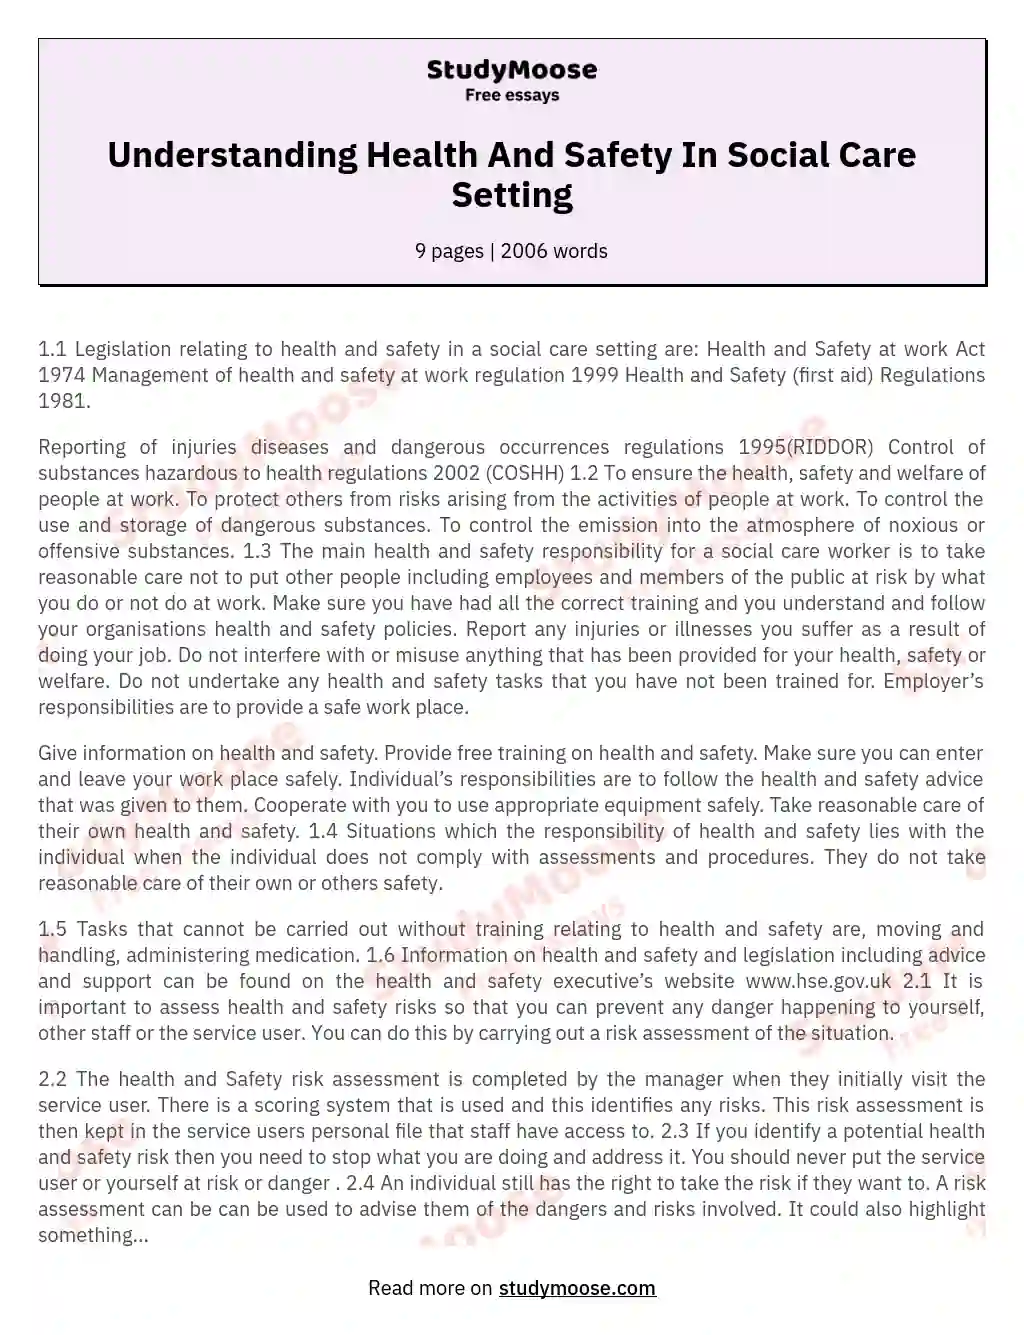 Understanding Health And Safety In Social Care Setting